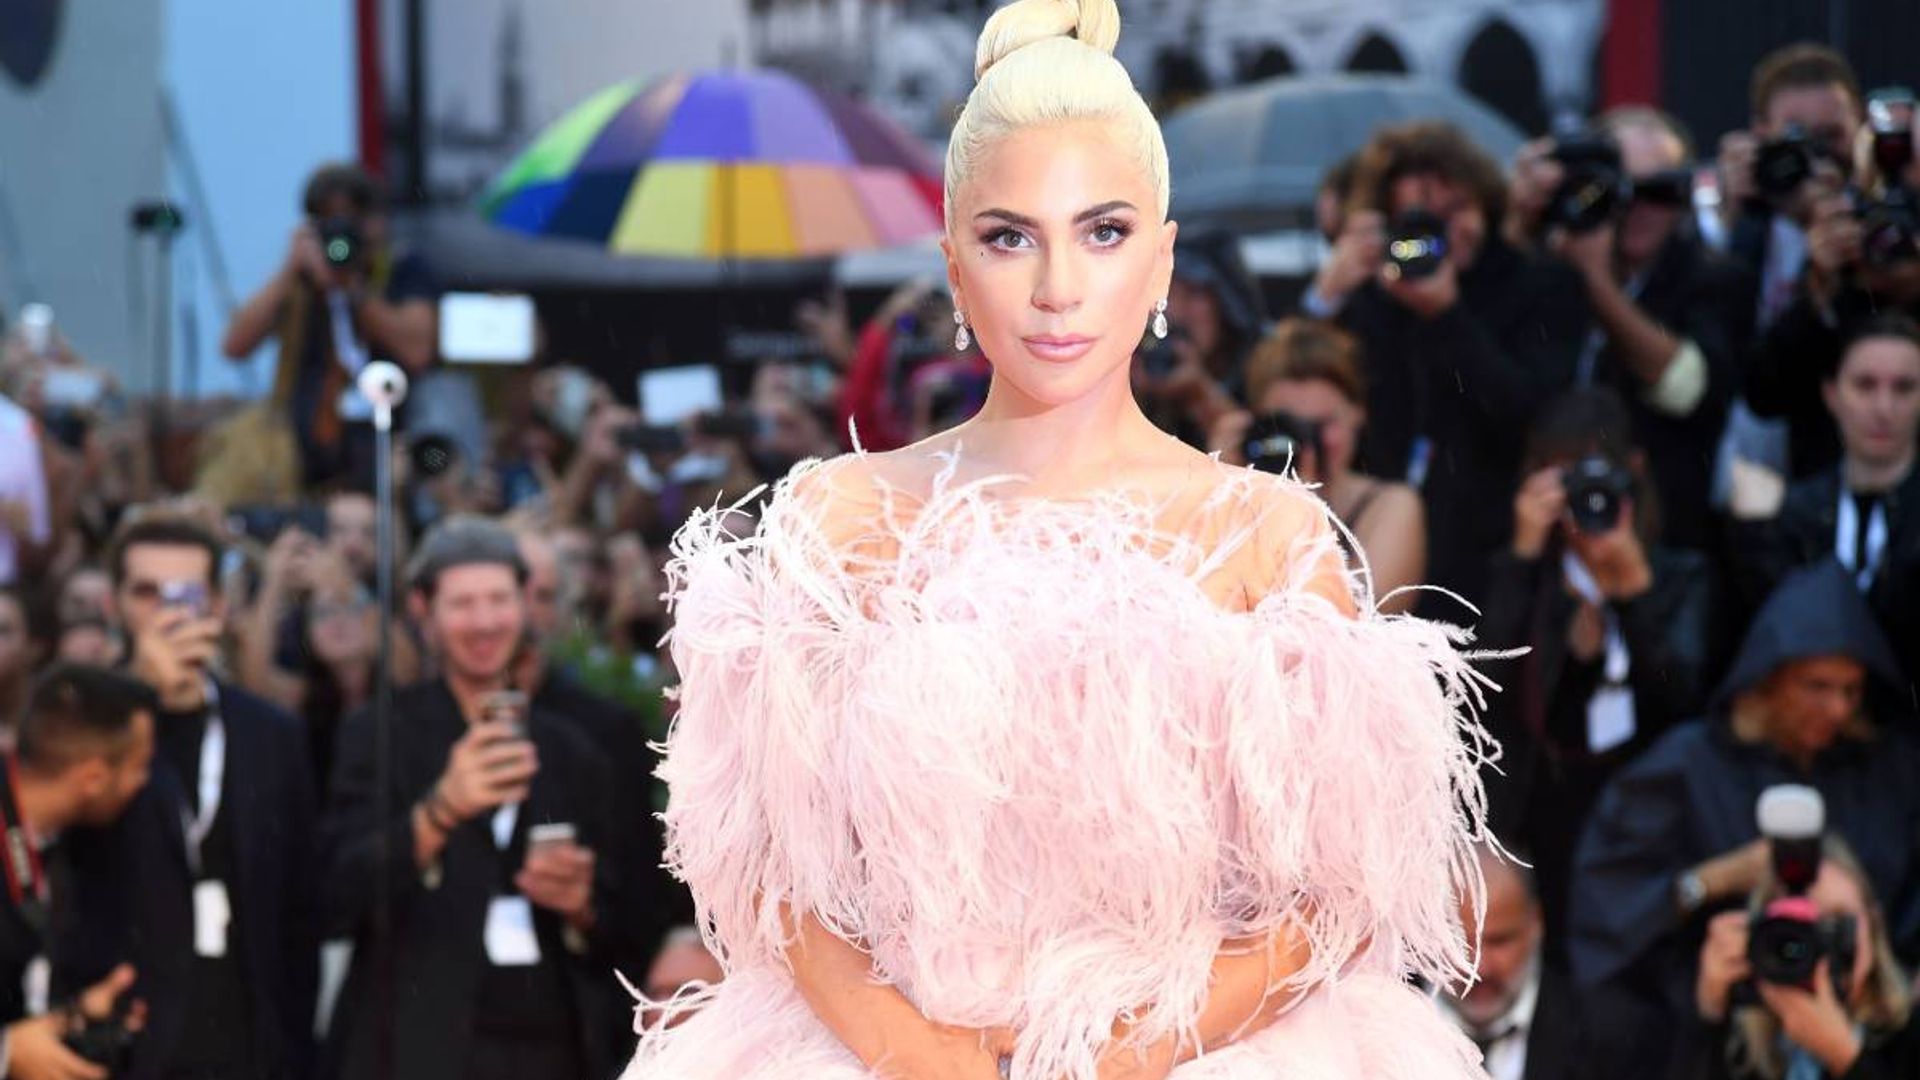 Lady Gaga is a vision in a curve-hugging dress we want in our closets asap